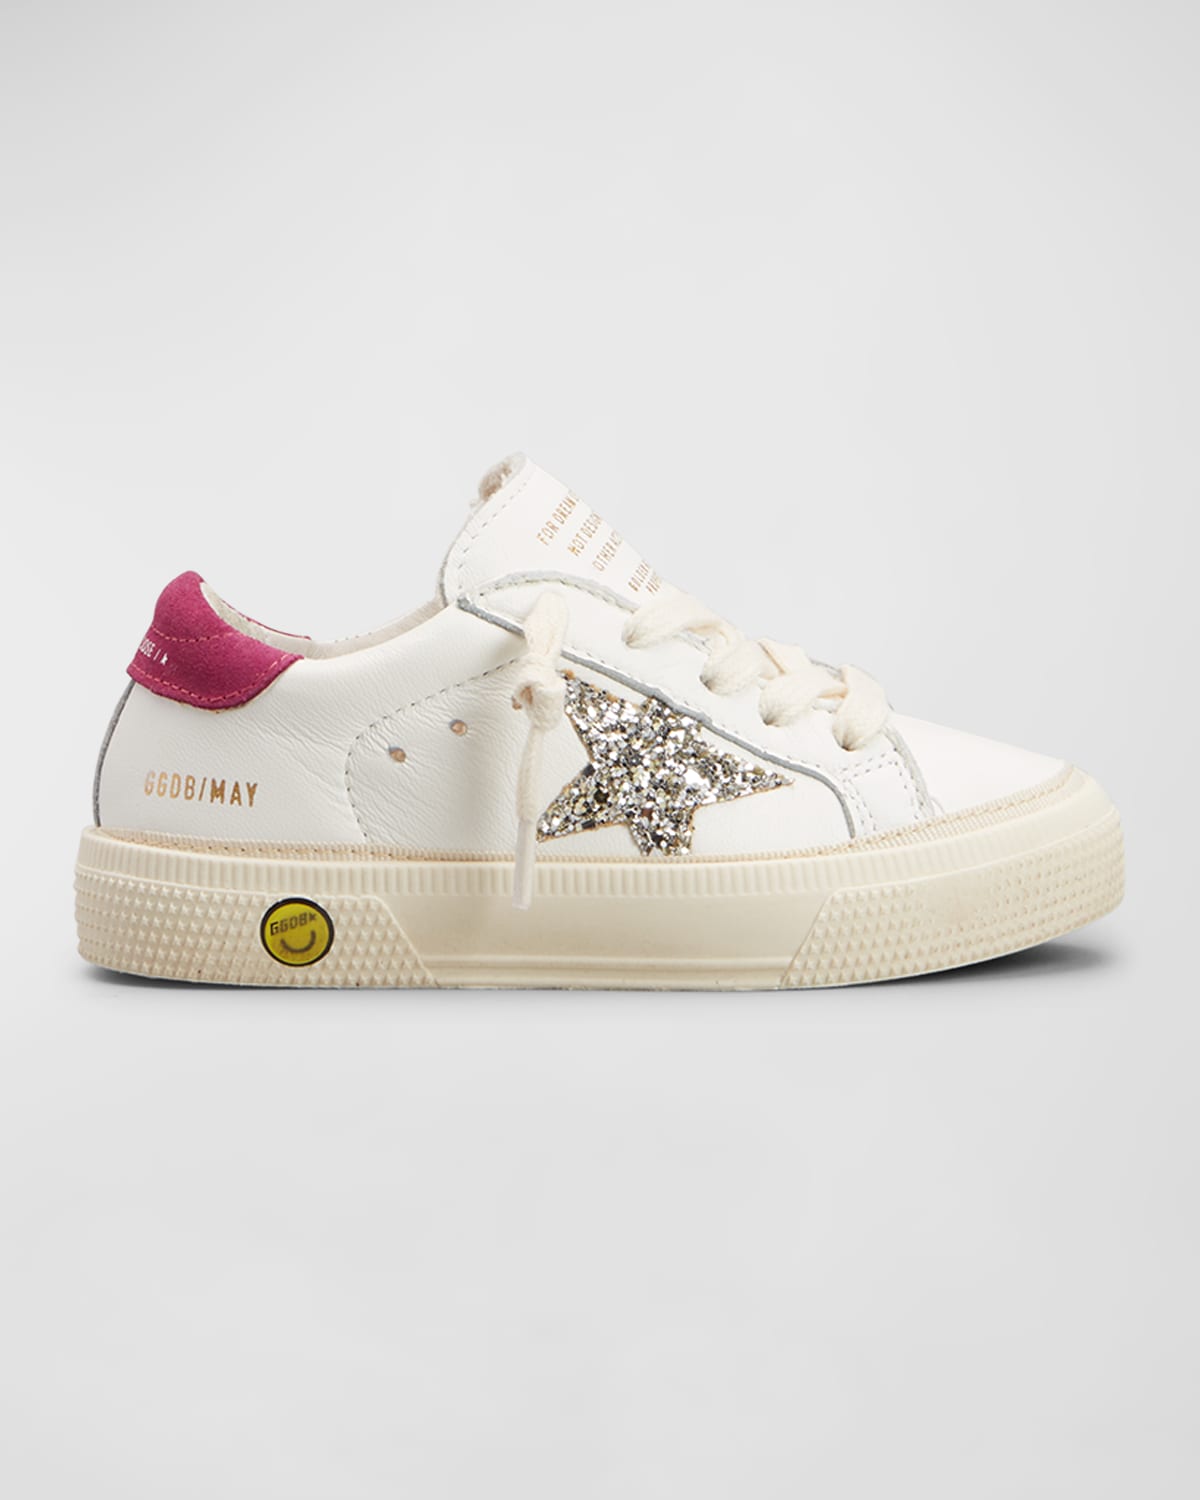 GOLDEN GOOSE GIRL'S MAY GLITTER STAR SNEAKERS, TODDLERS/KIDS